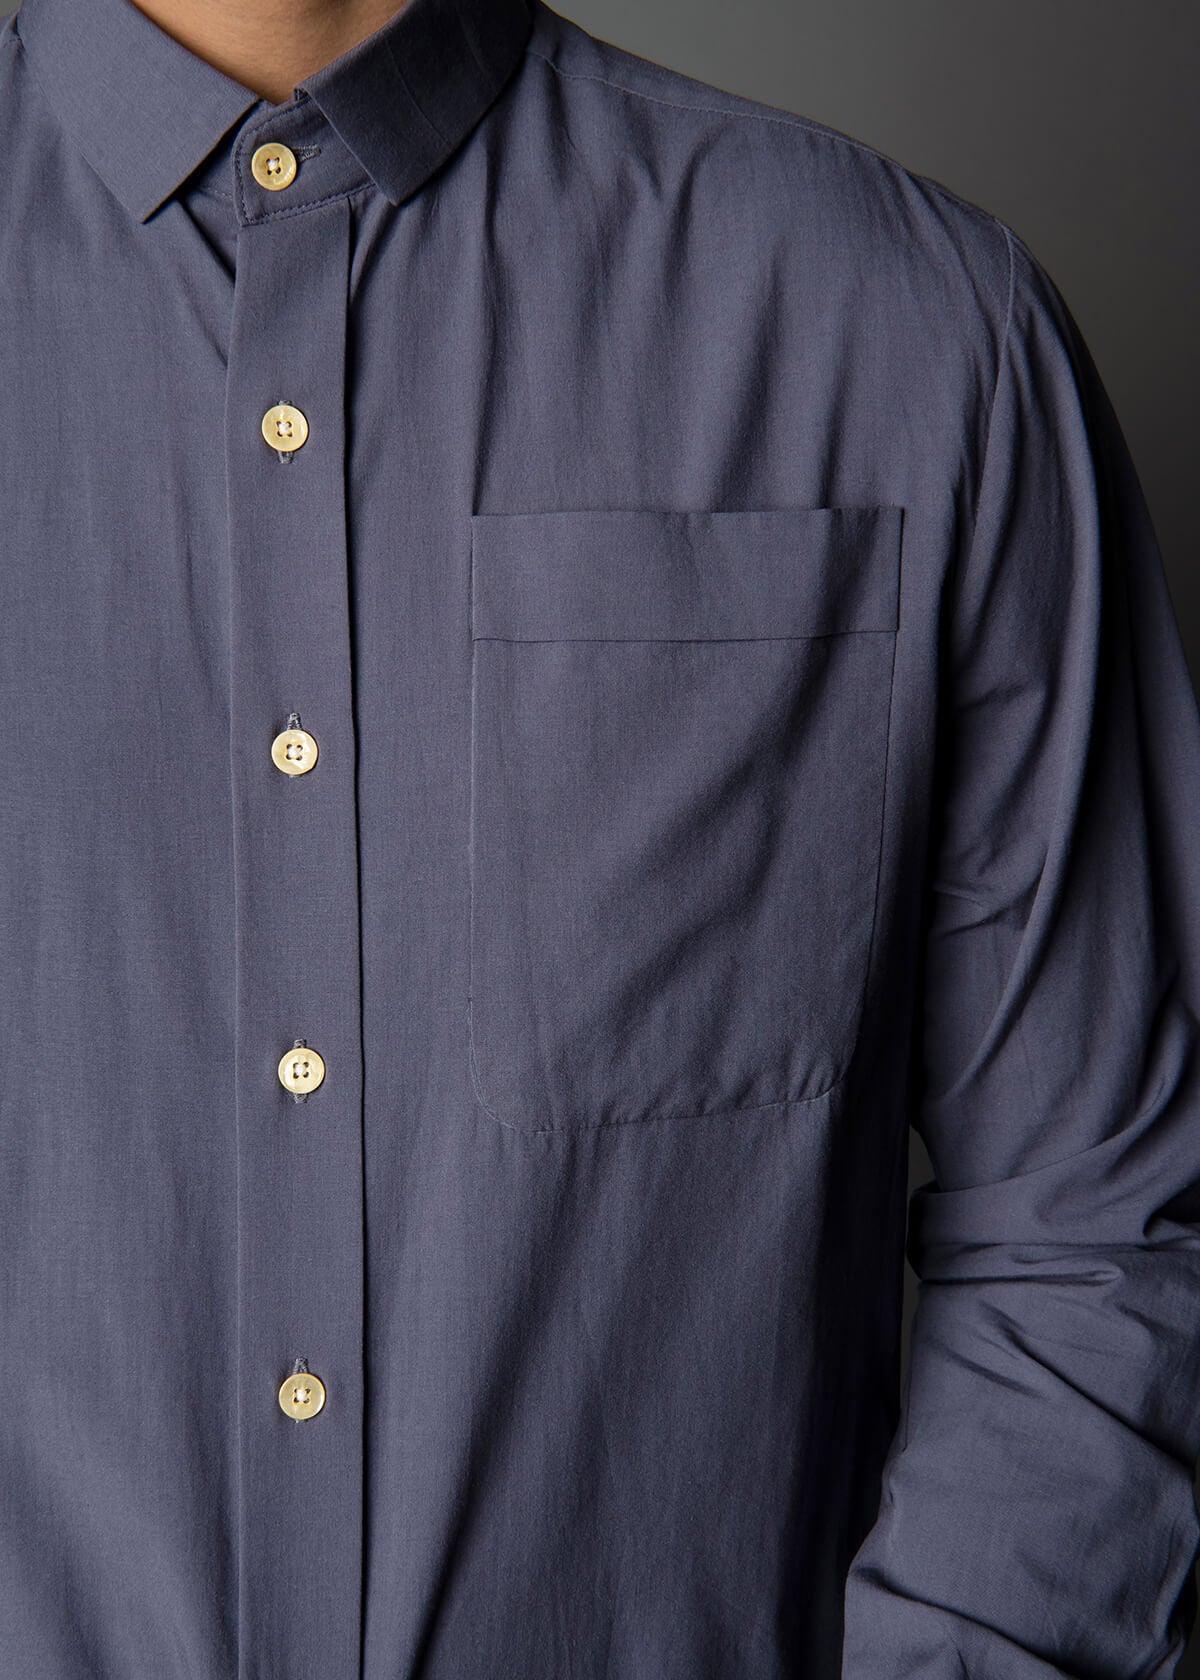 cotton and modal navy blue shirt for men